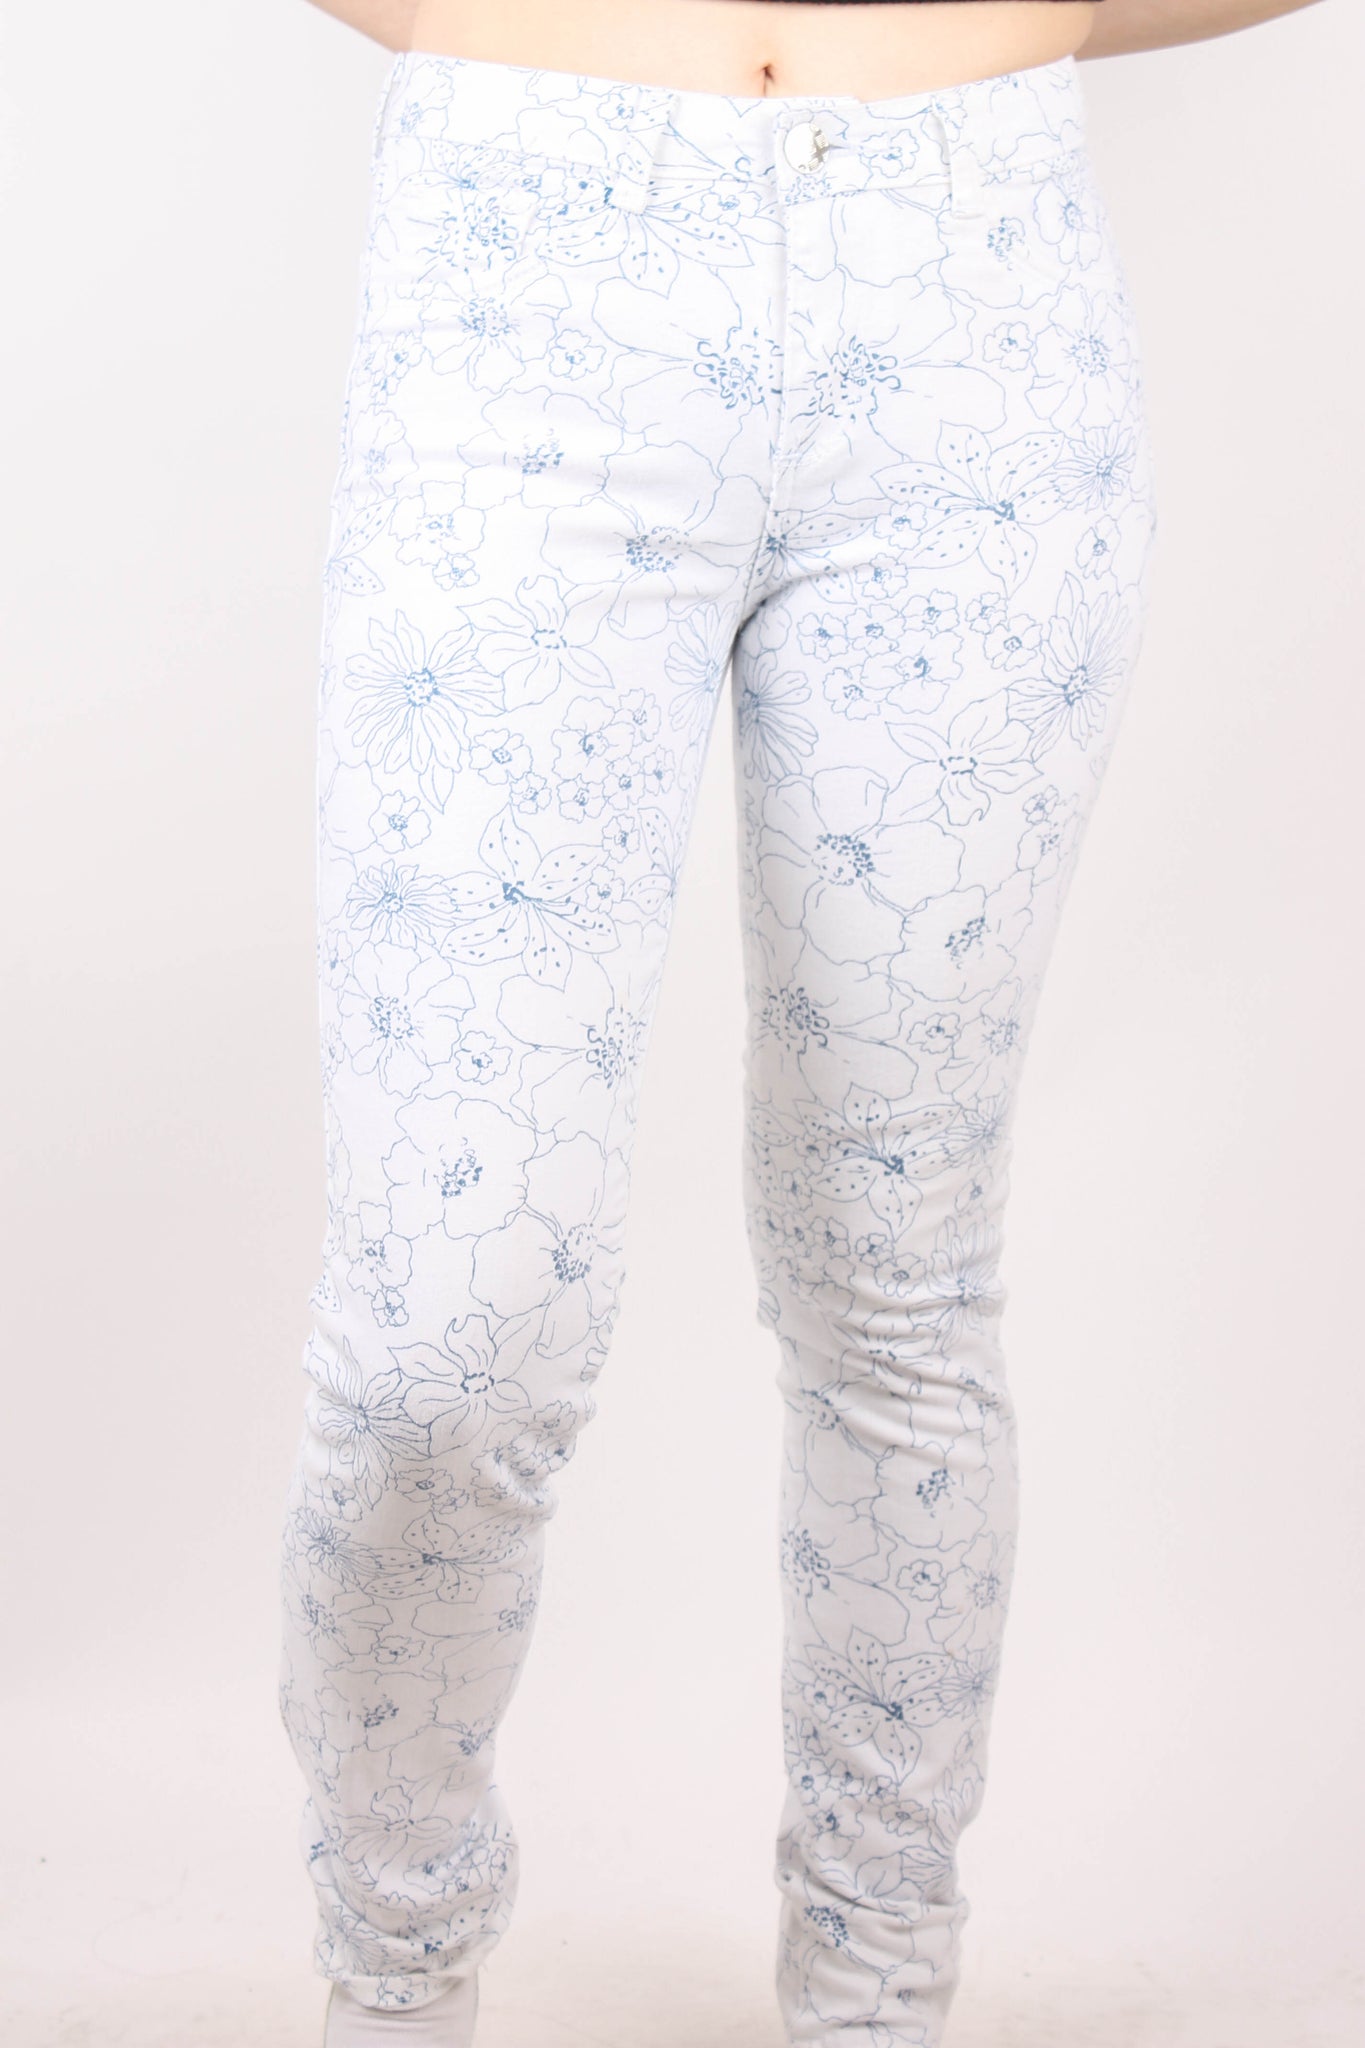 FBS JEANS - Jeans Blancos Con Flower Print Azul